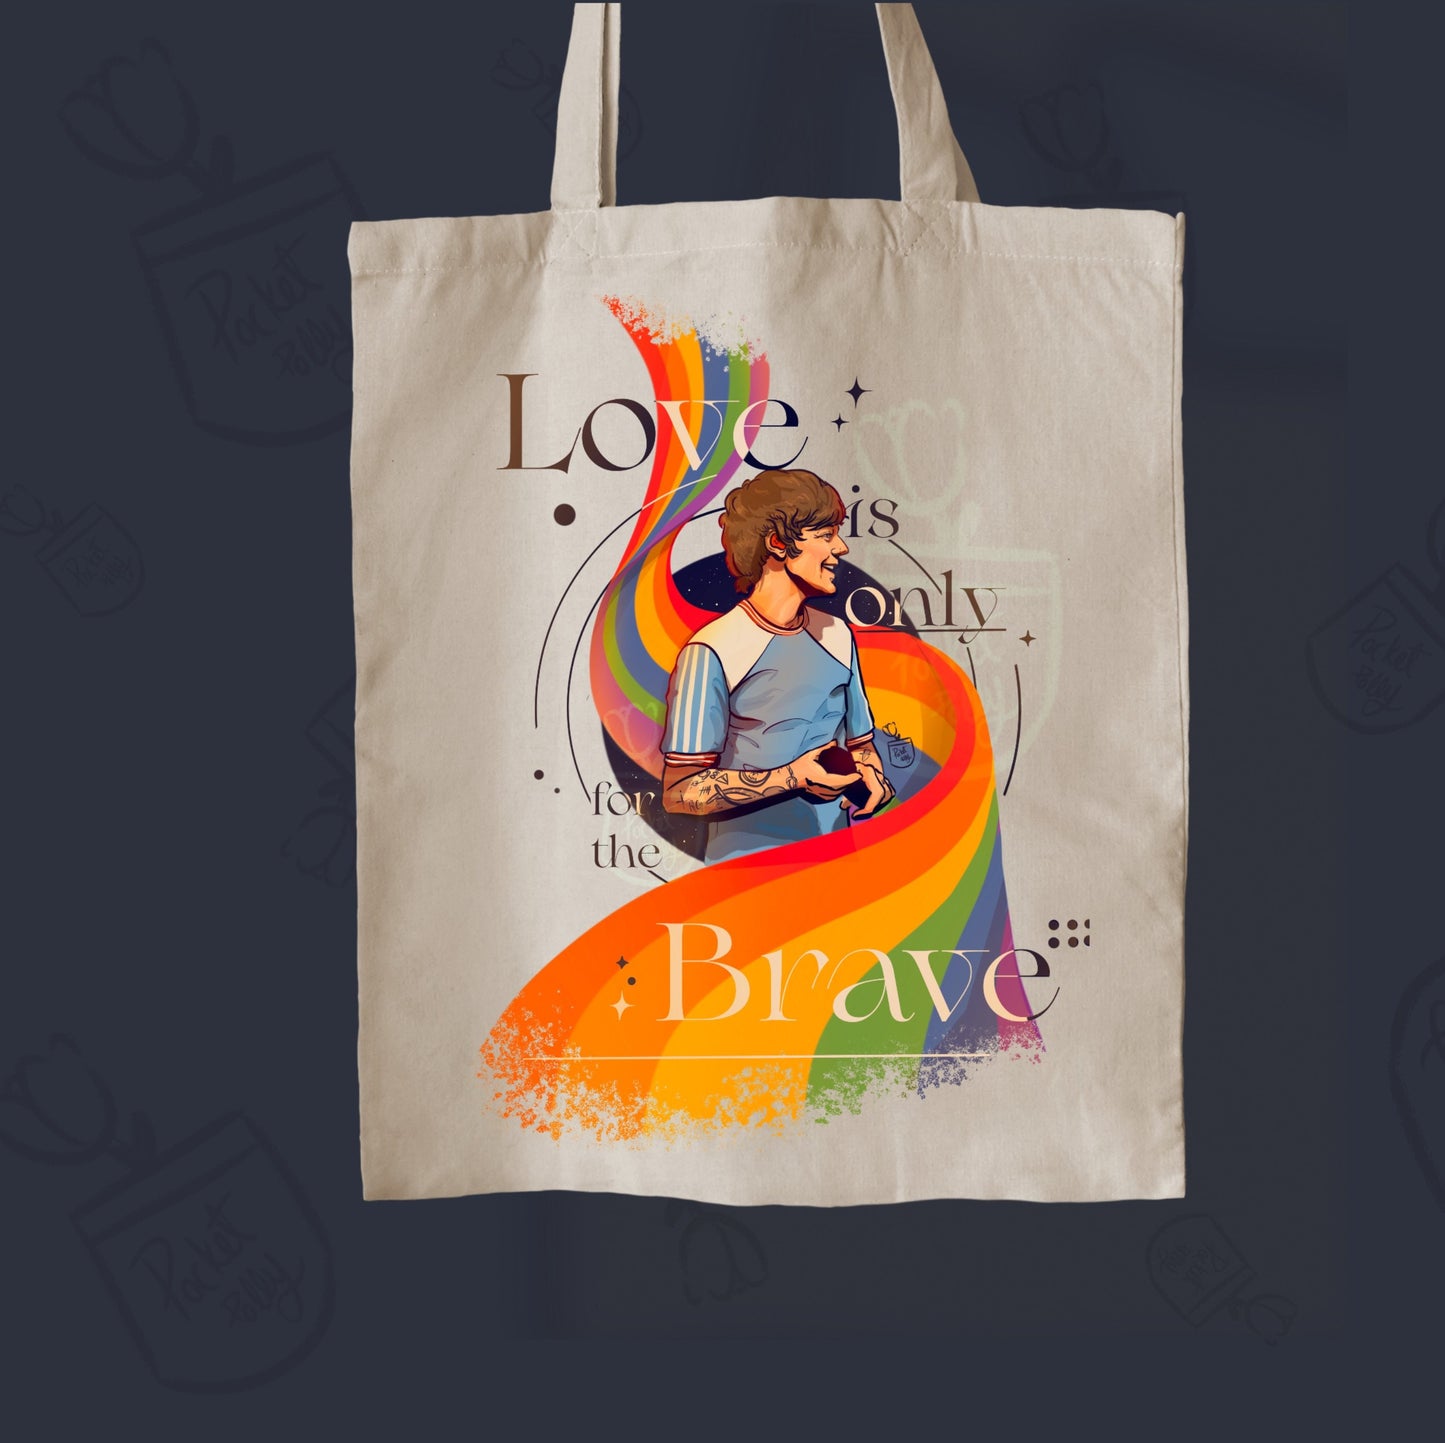 Louis Tomlinson Only the brave tote bag